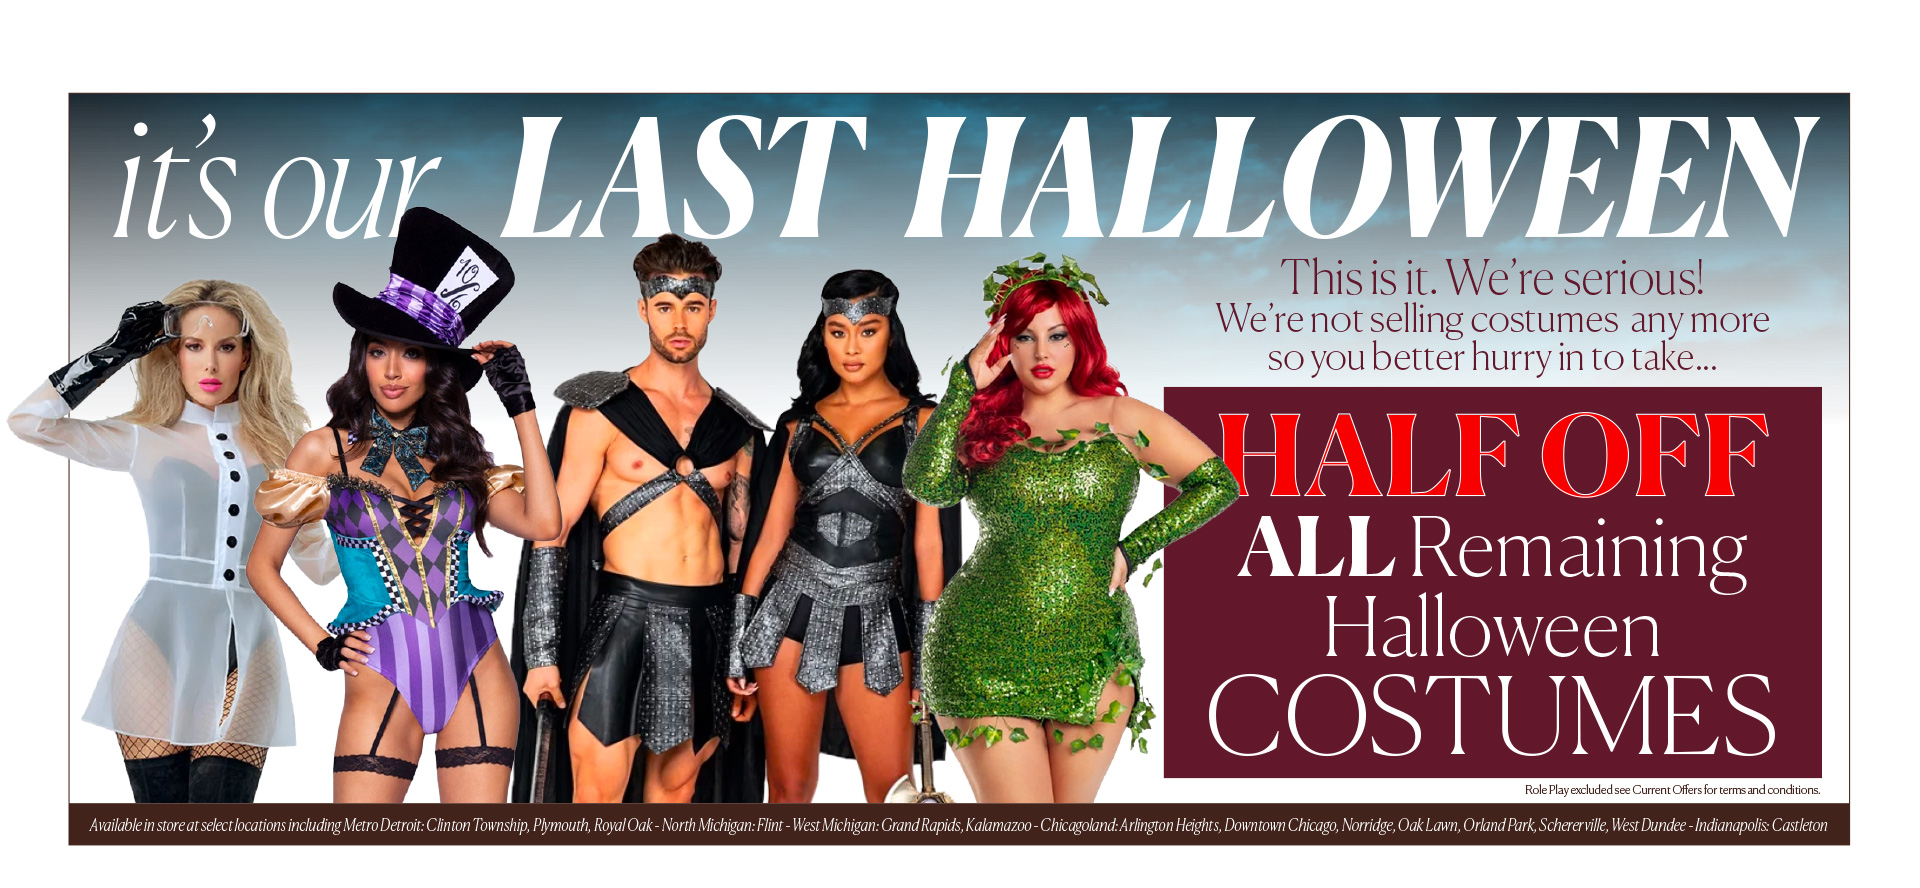 it's our LAST HALLOWEEN - This is it. We’re serious!  We’re not selling costumes  any more so you better hurry in to take... HALF OFF  ALL Remaining Halloween COSTUMES - in store & online